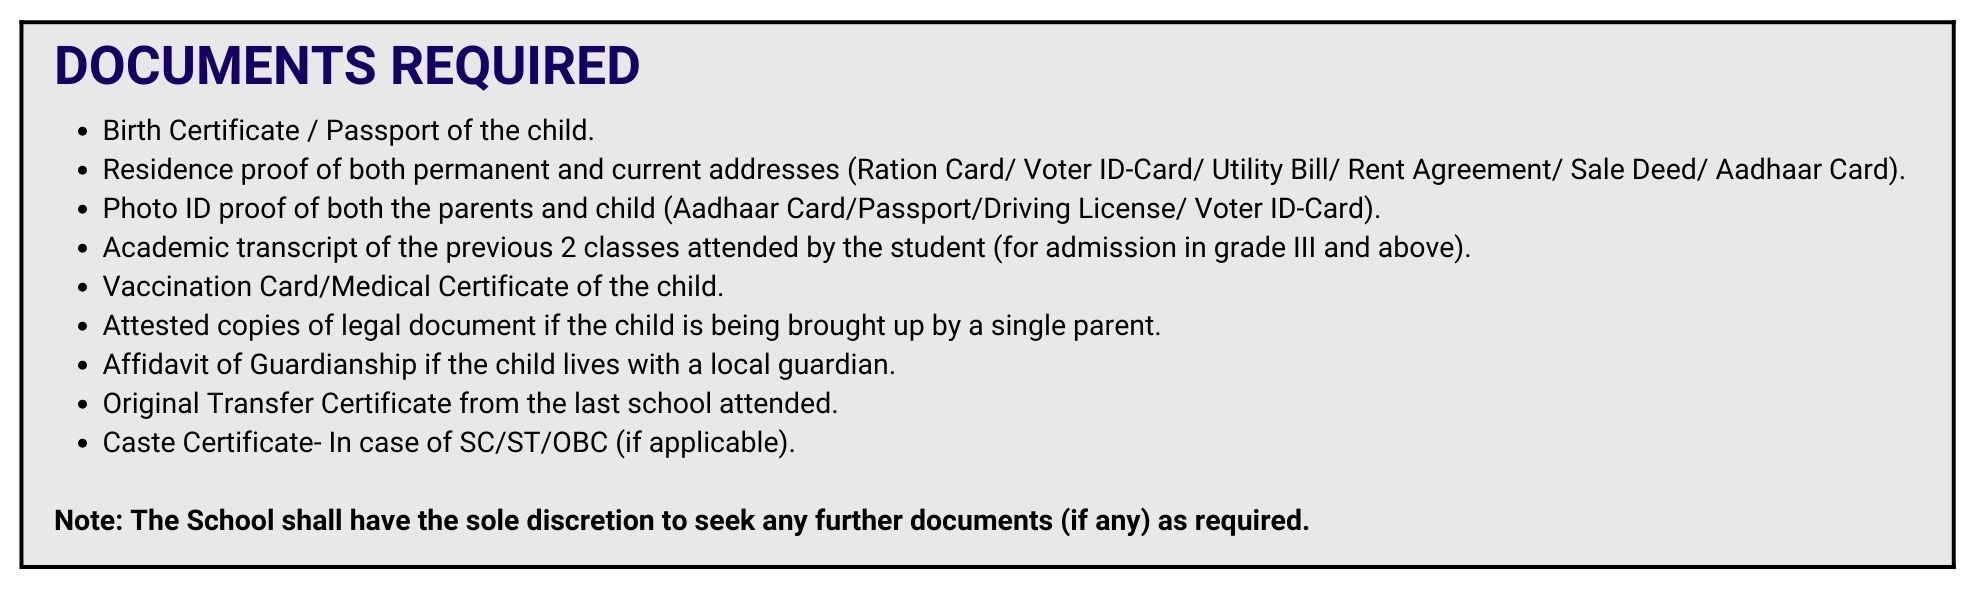 DOCUMENTS REQUIRED Birth Certificate / Passport of the child. Residence proof of both permanent and current addresses (Ration Card/ Voter ID-Card/ Utility Bill/ Rent Agreement/ Sale Deed/ Aadhaar Card). Photo ID proof of both the parents and child - 1